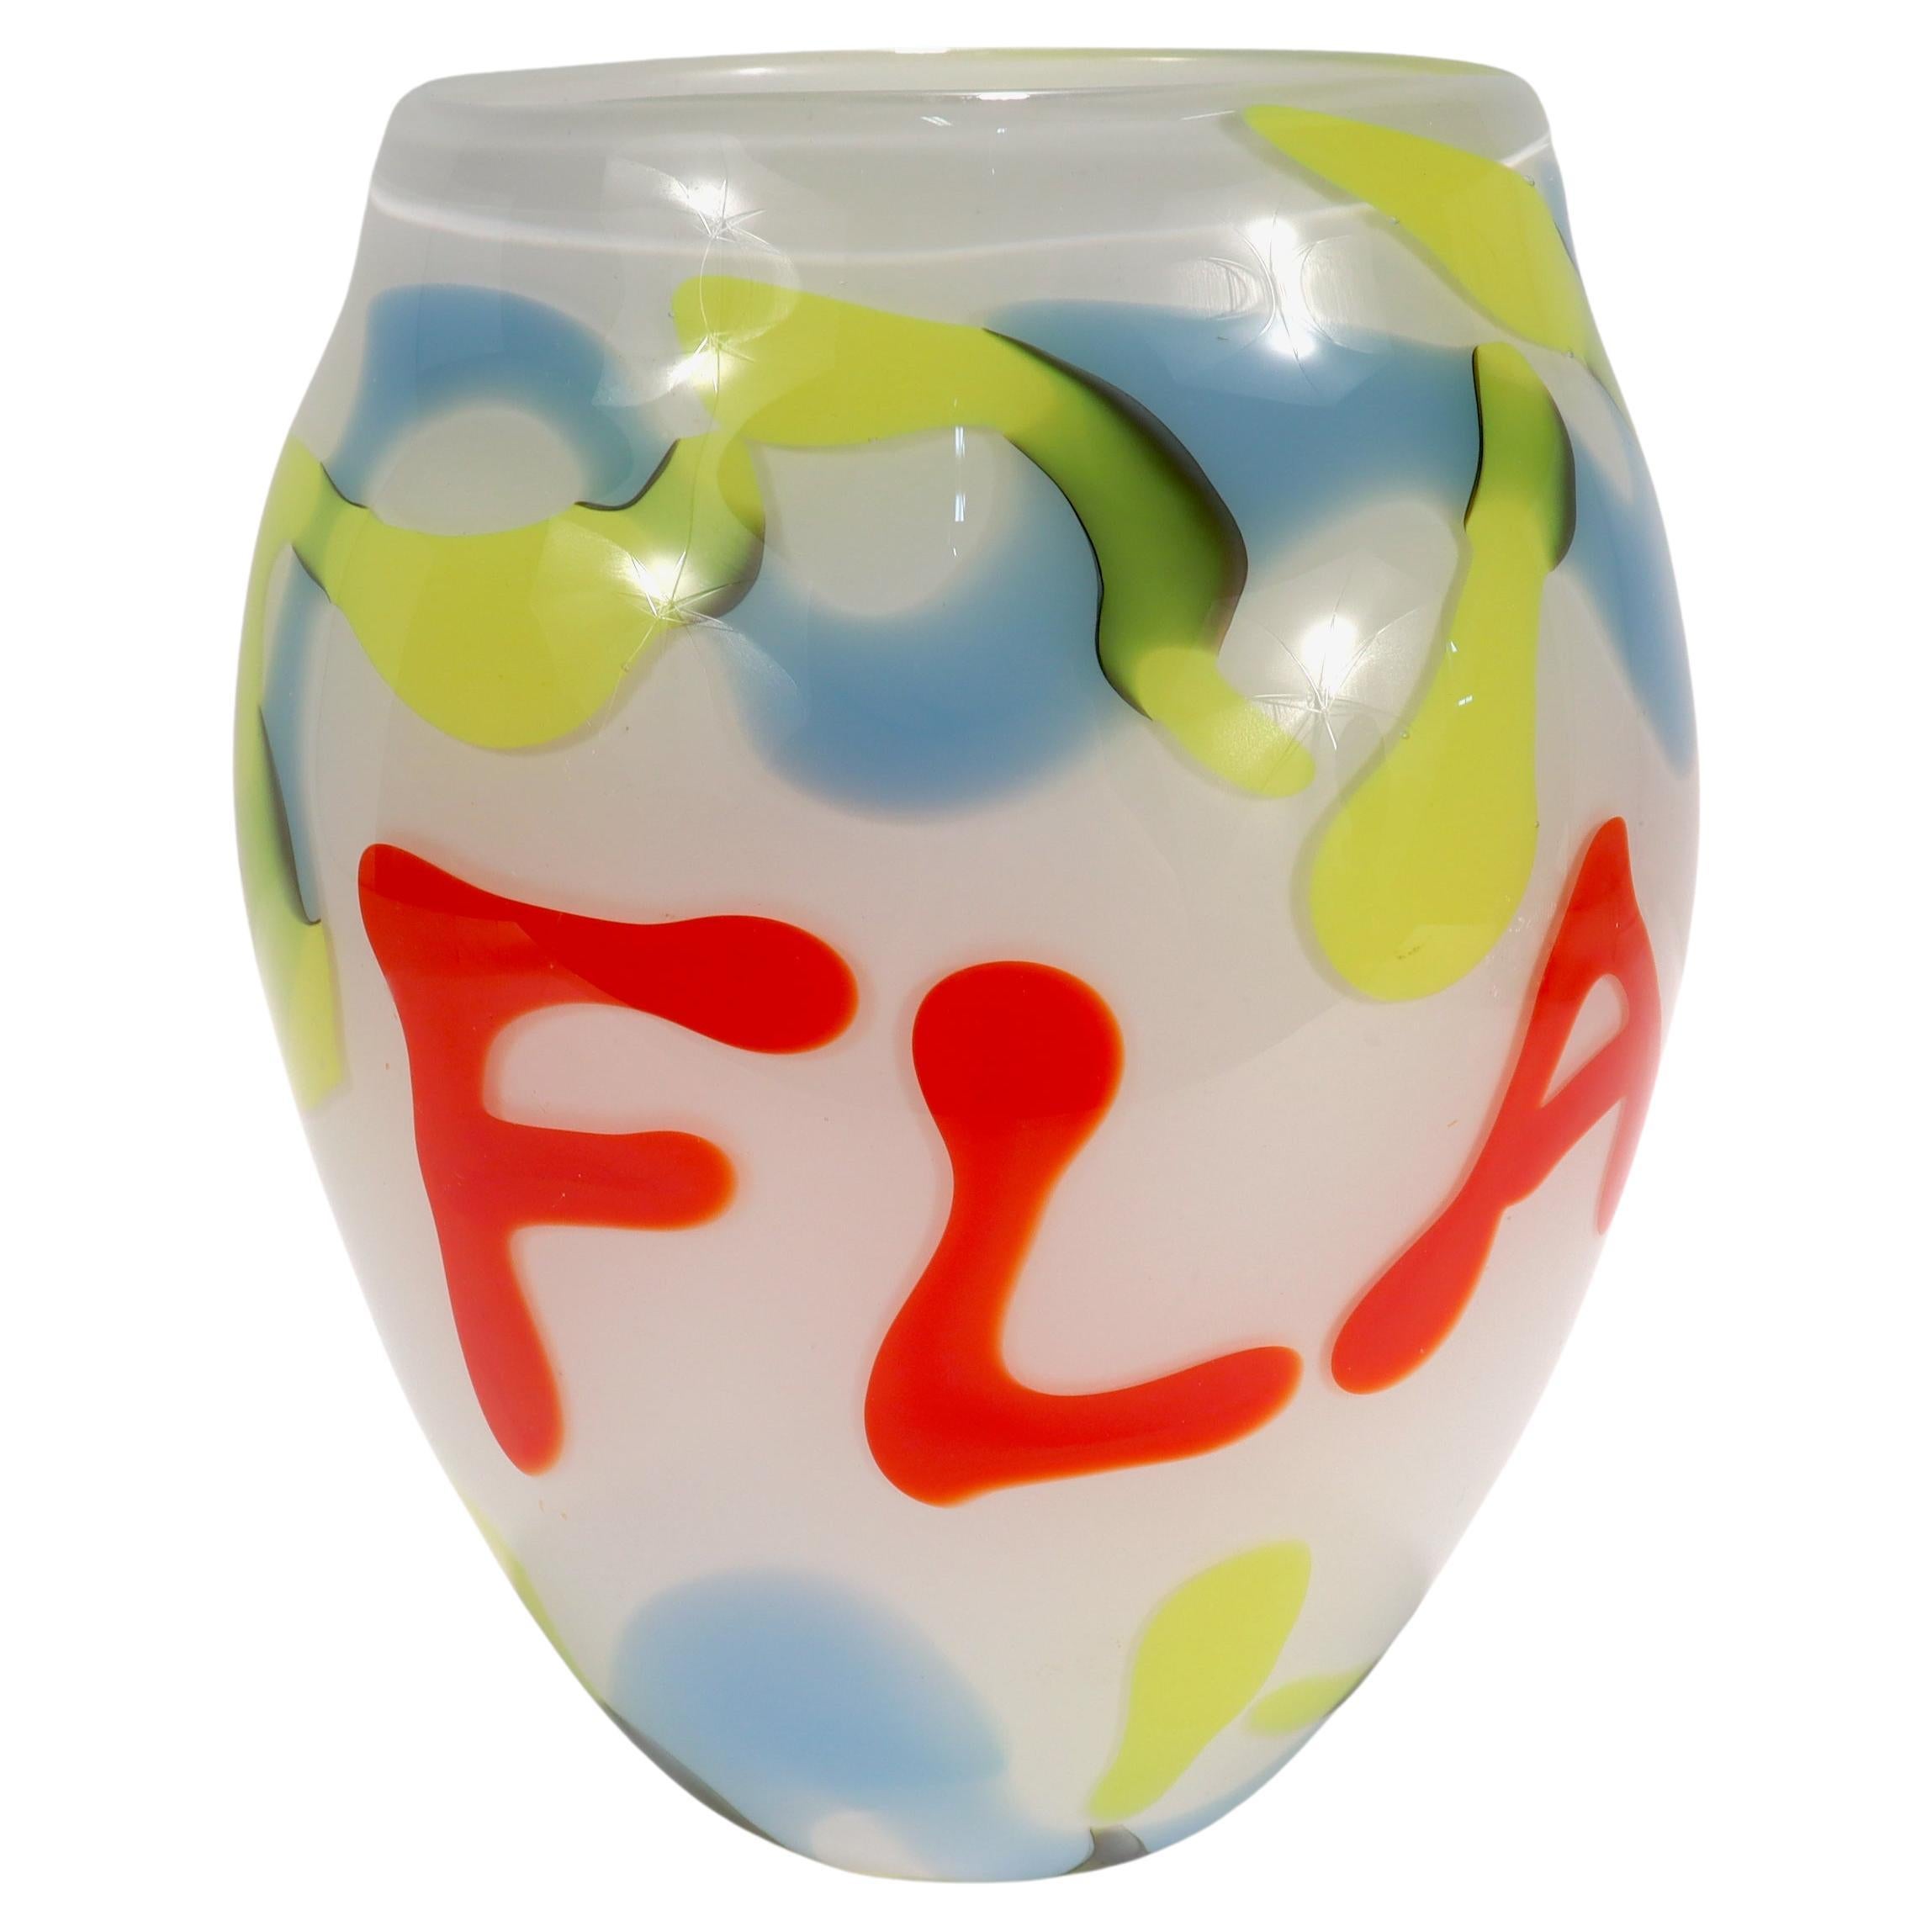 "FLASH" Pop-Art Cased Art Glass Vase in White, Blue, Yellow, & Red, 1999 For Sale